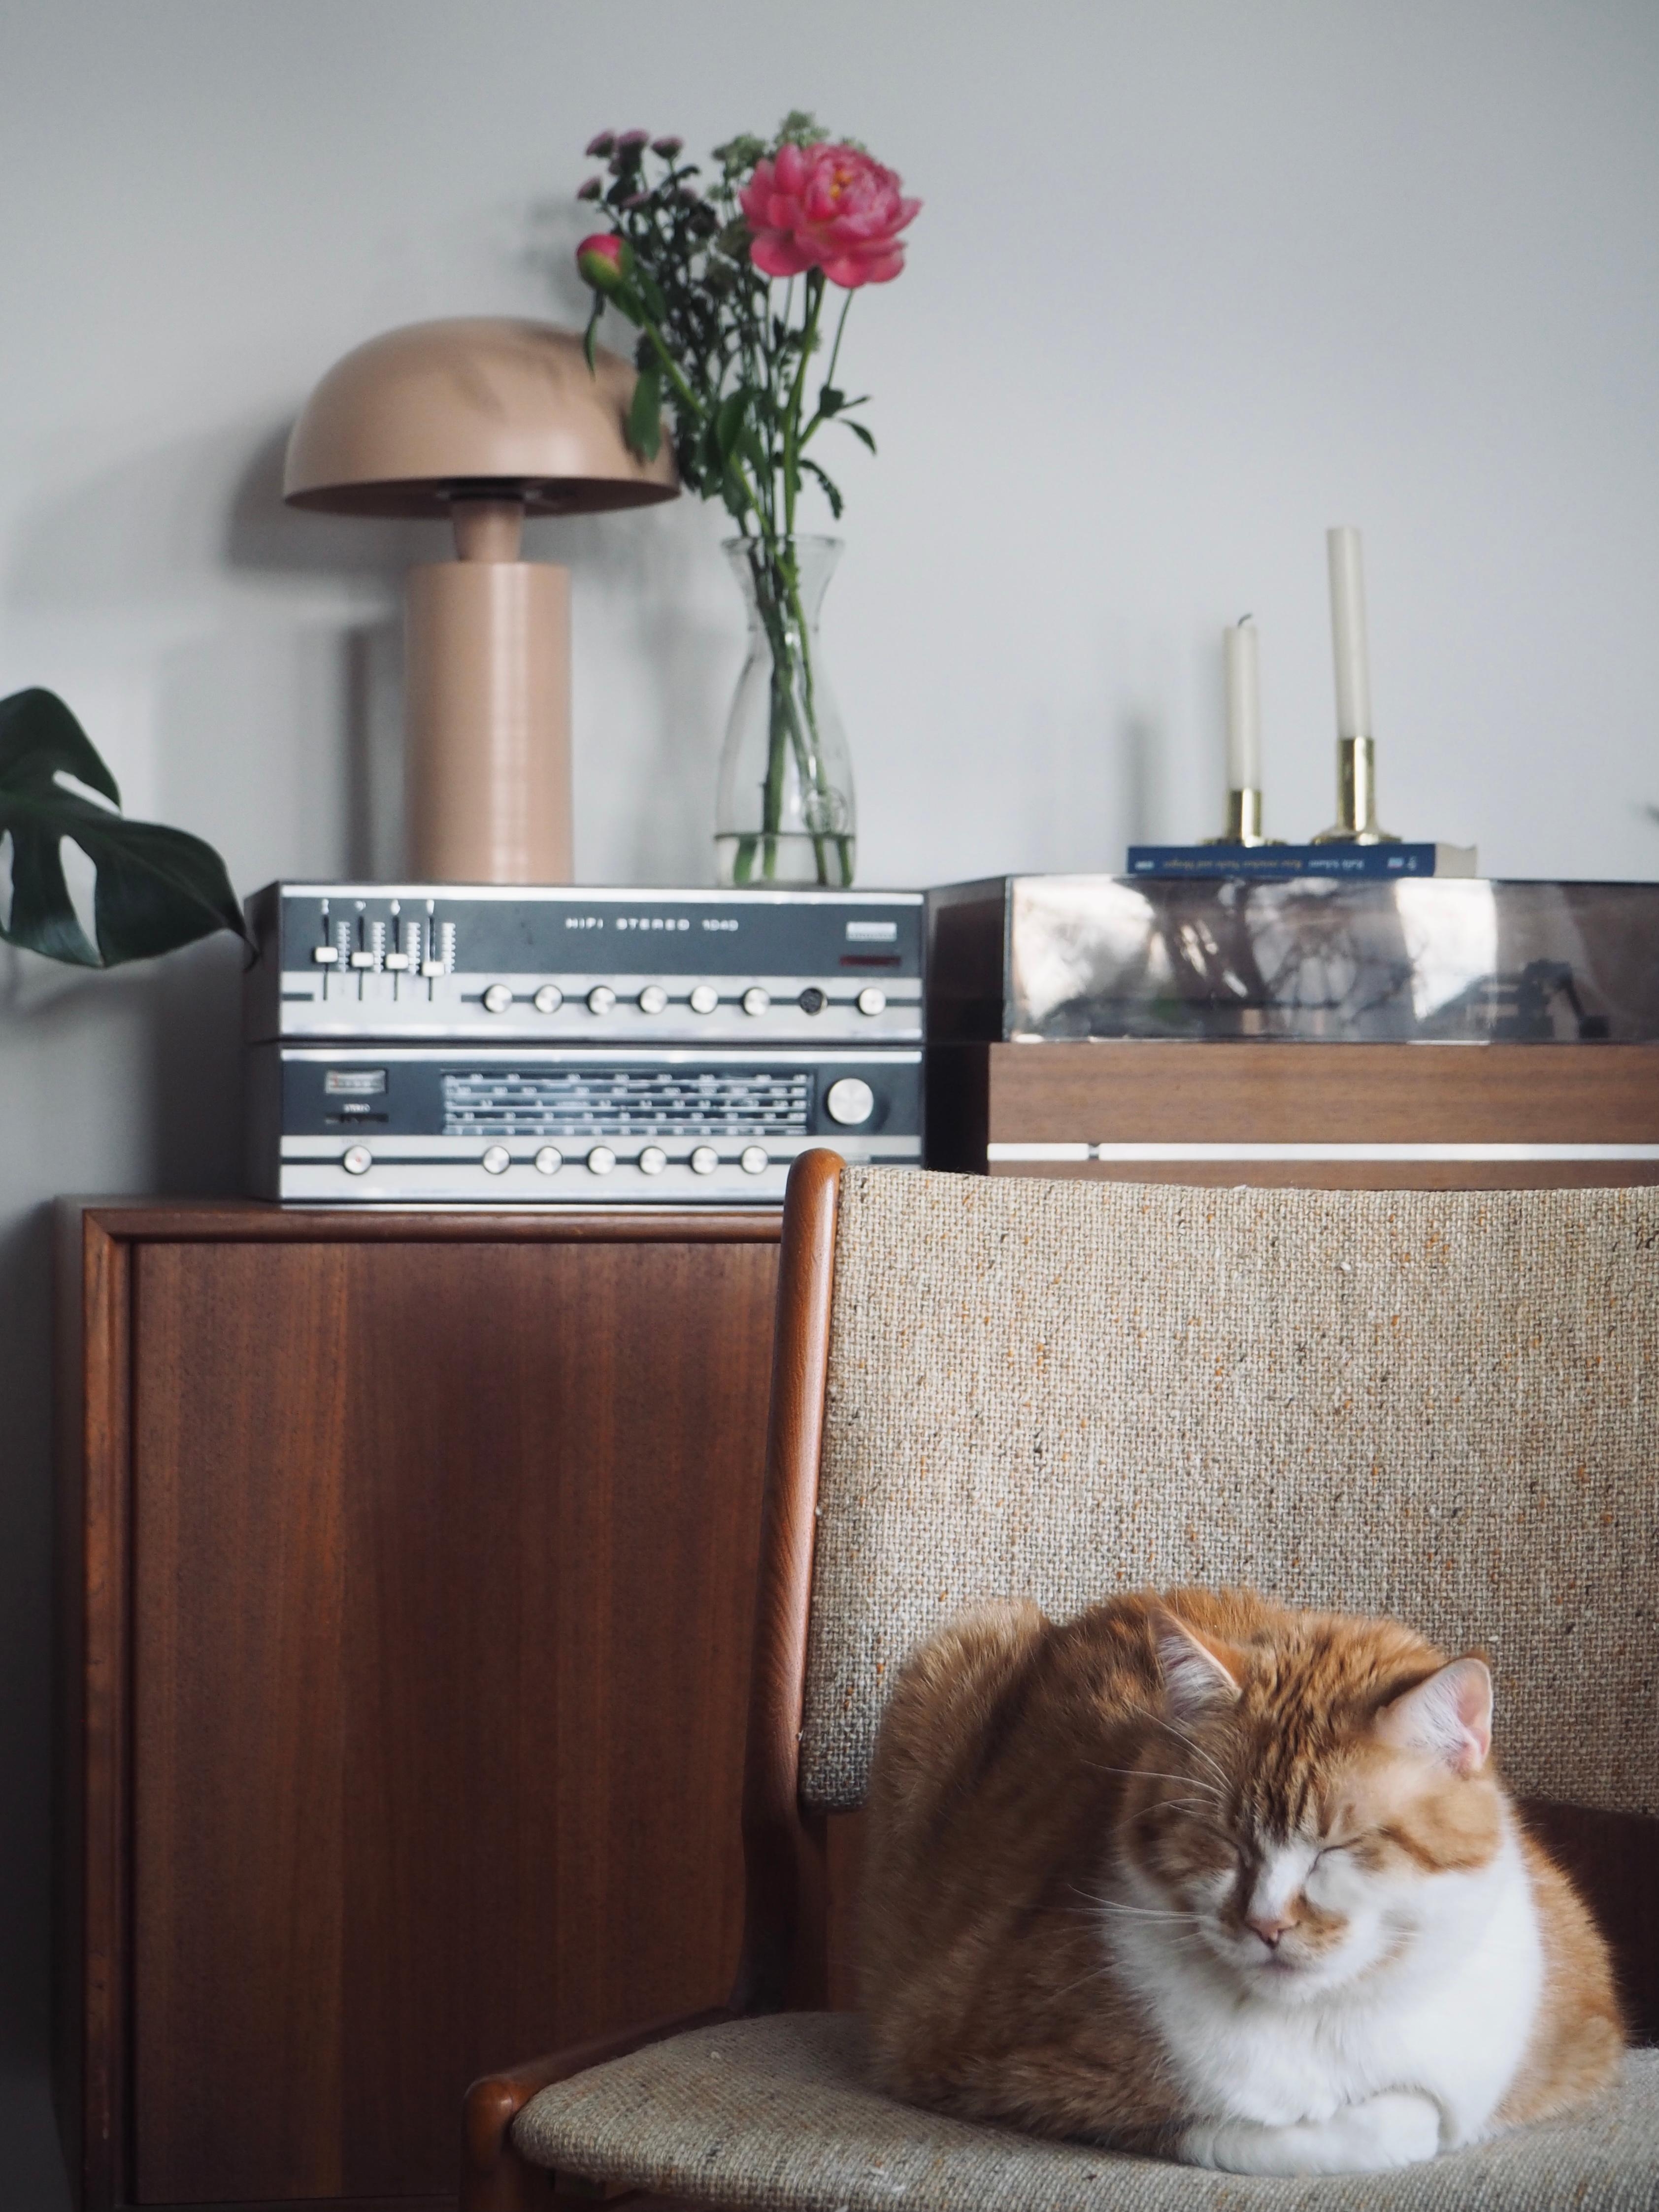 Ommm... 🧘🏼‍♀️
#sideboard#vintage#cats#relax